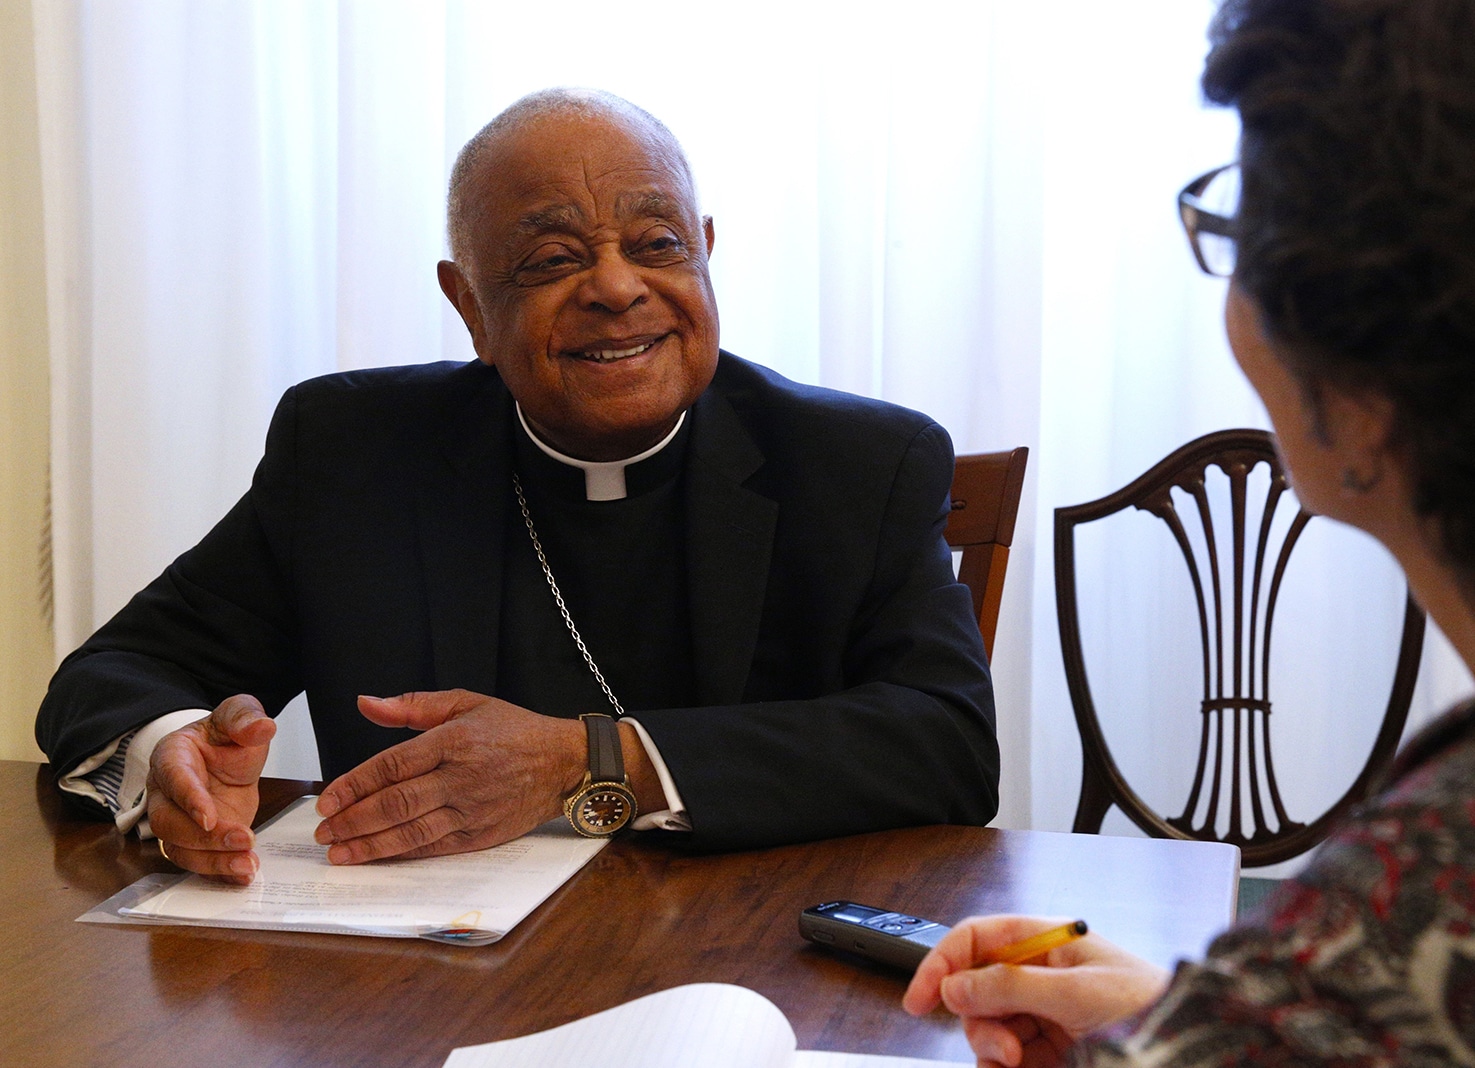 CARDINAL WILTON GREGORY INTERVIEW SYNOD